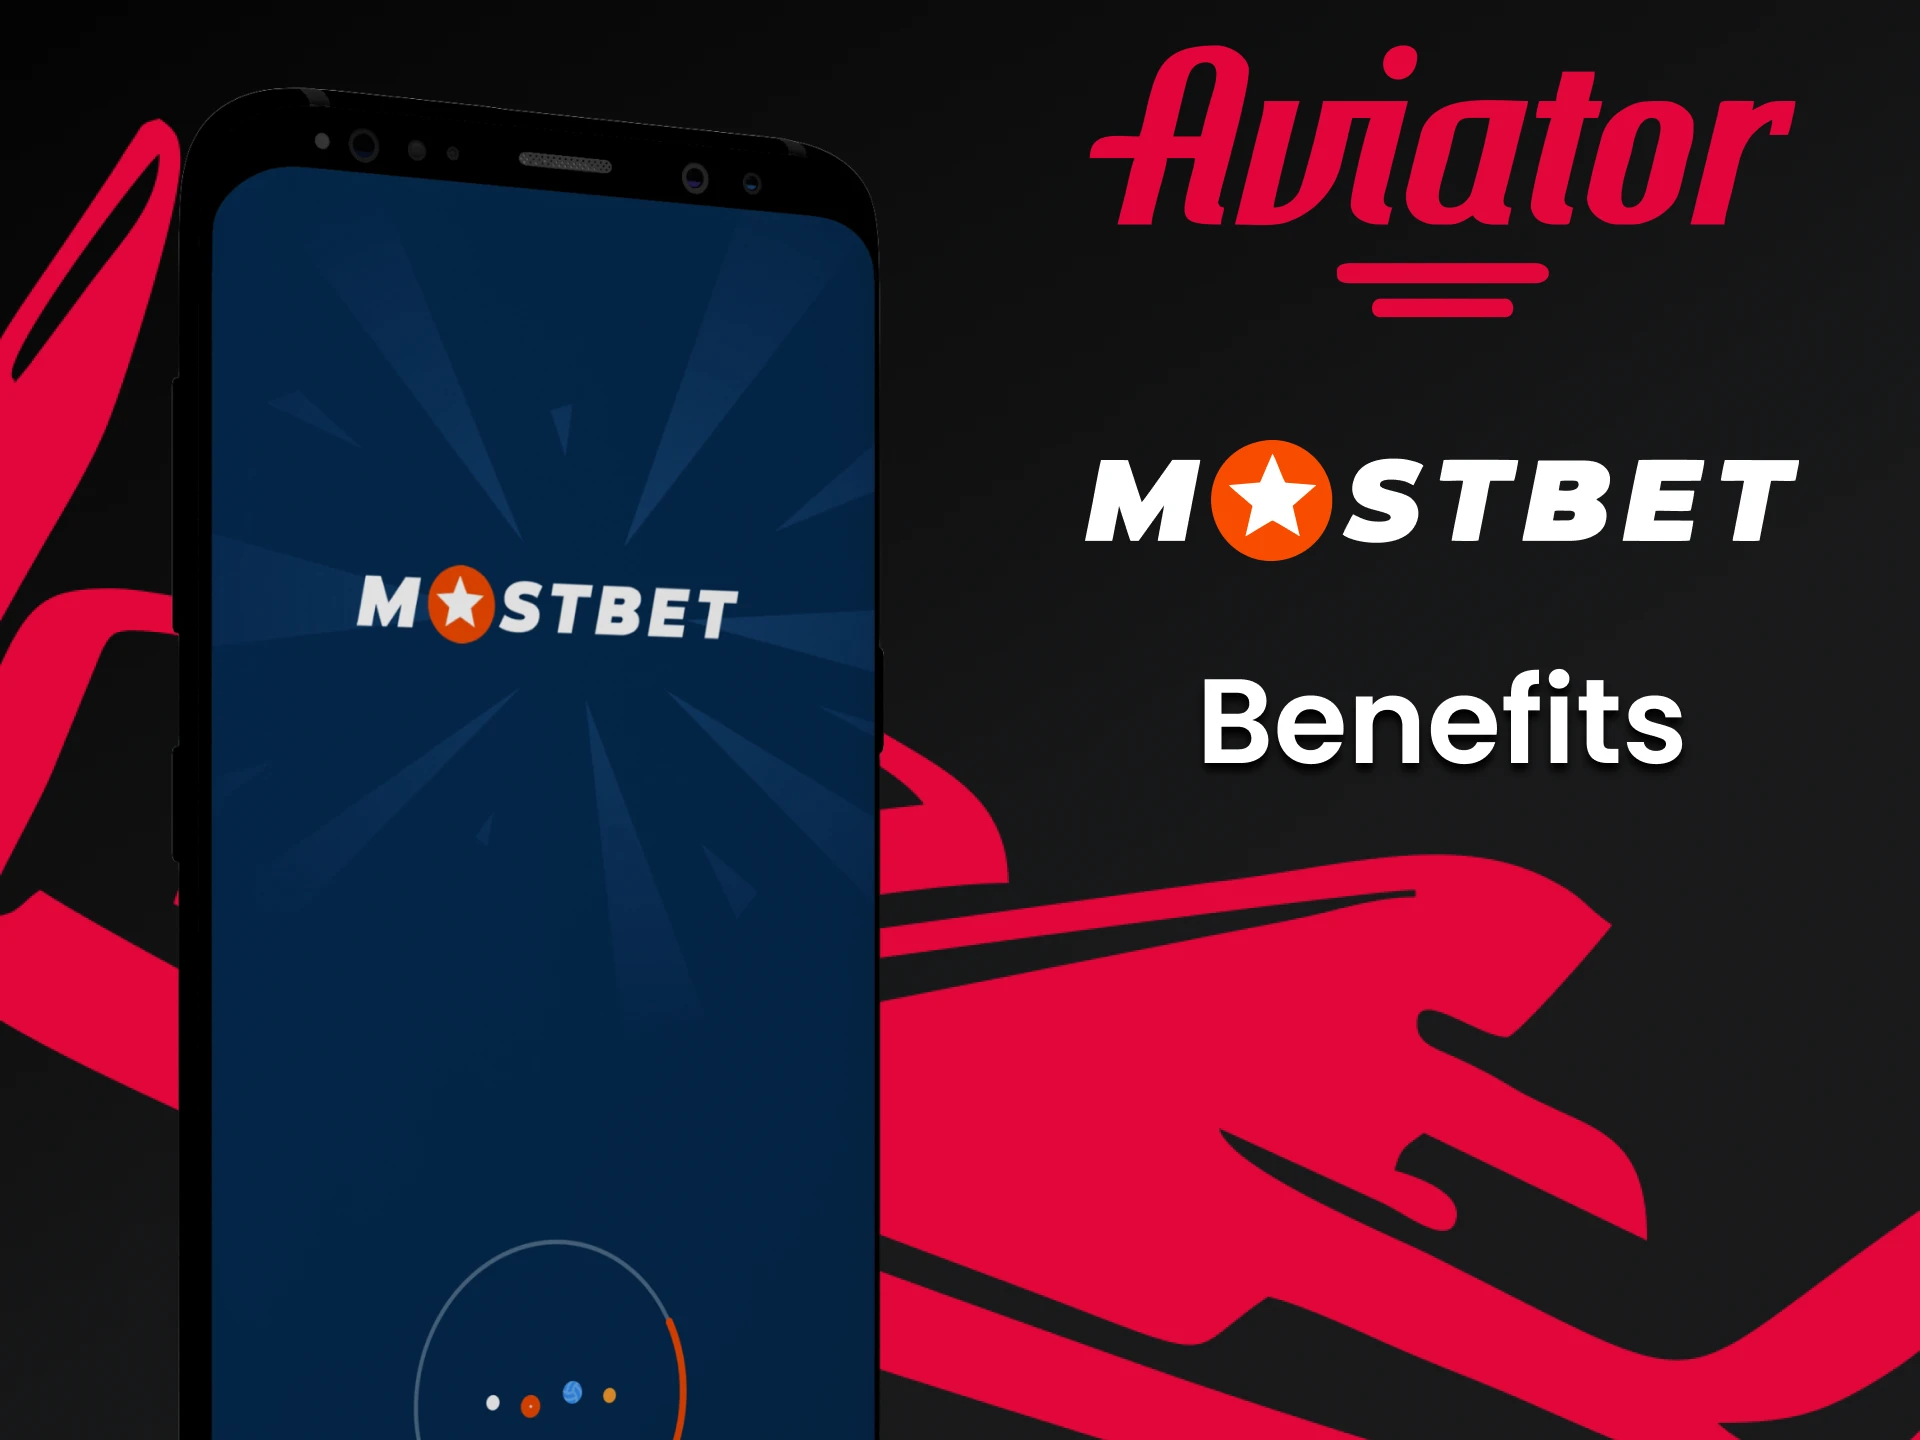 Choose to play Aviator Mostbet.